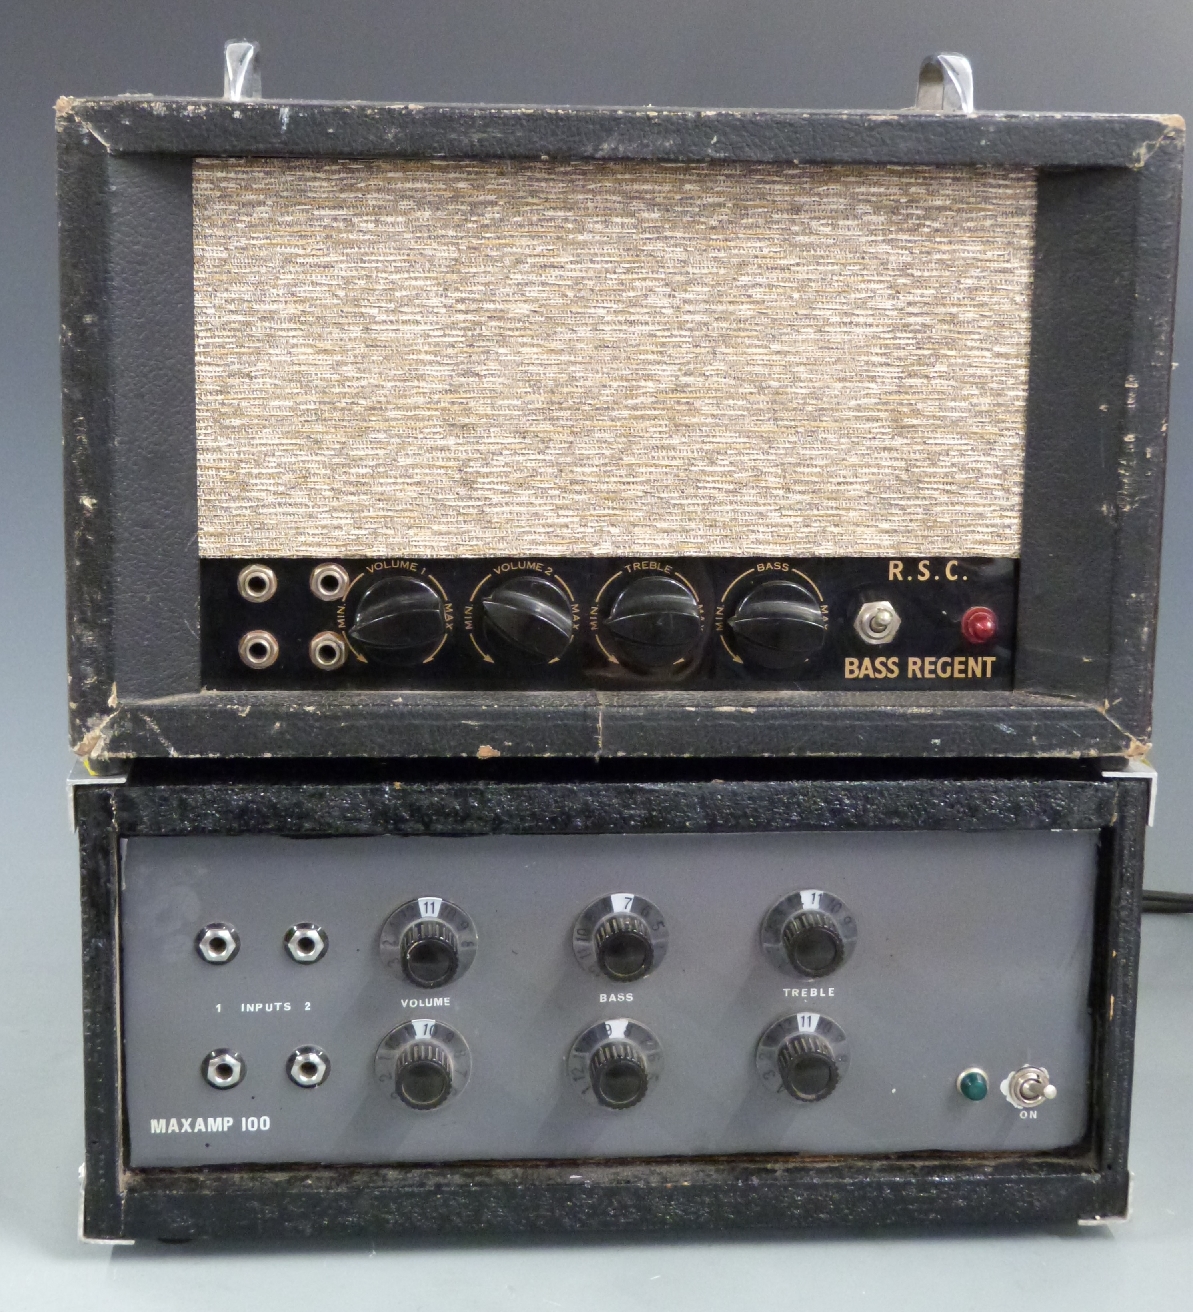 RSC Bass Regent valve amplifier together with a 'Max Amp' 100